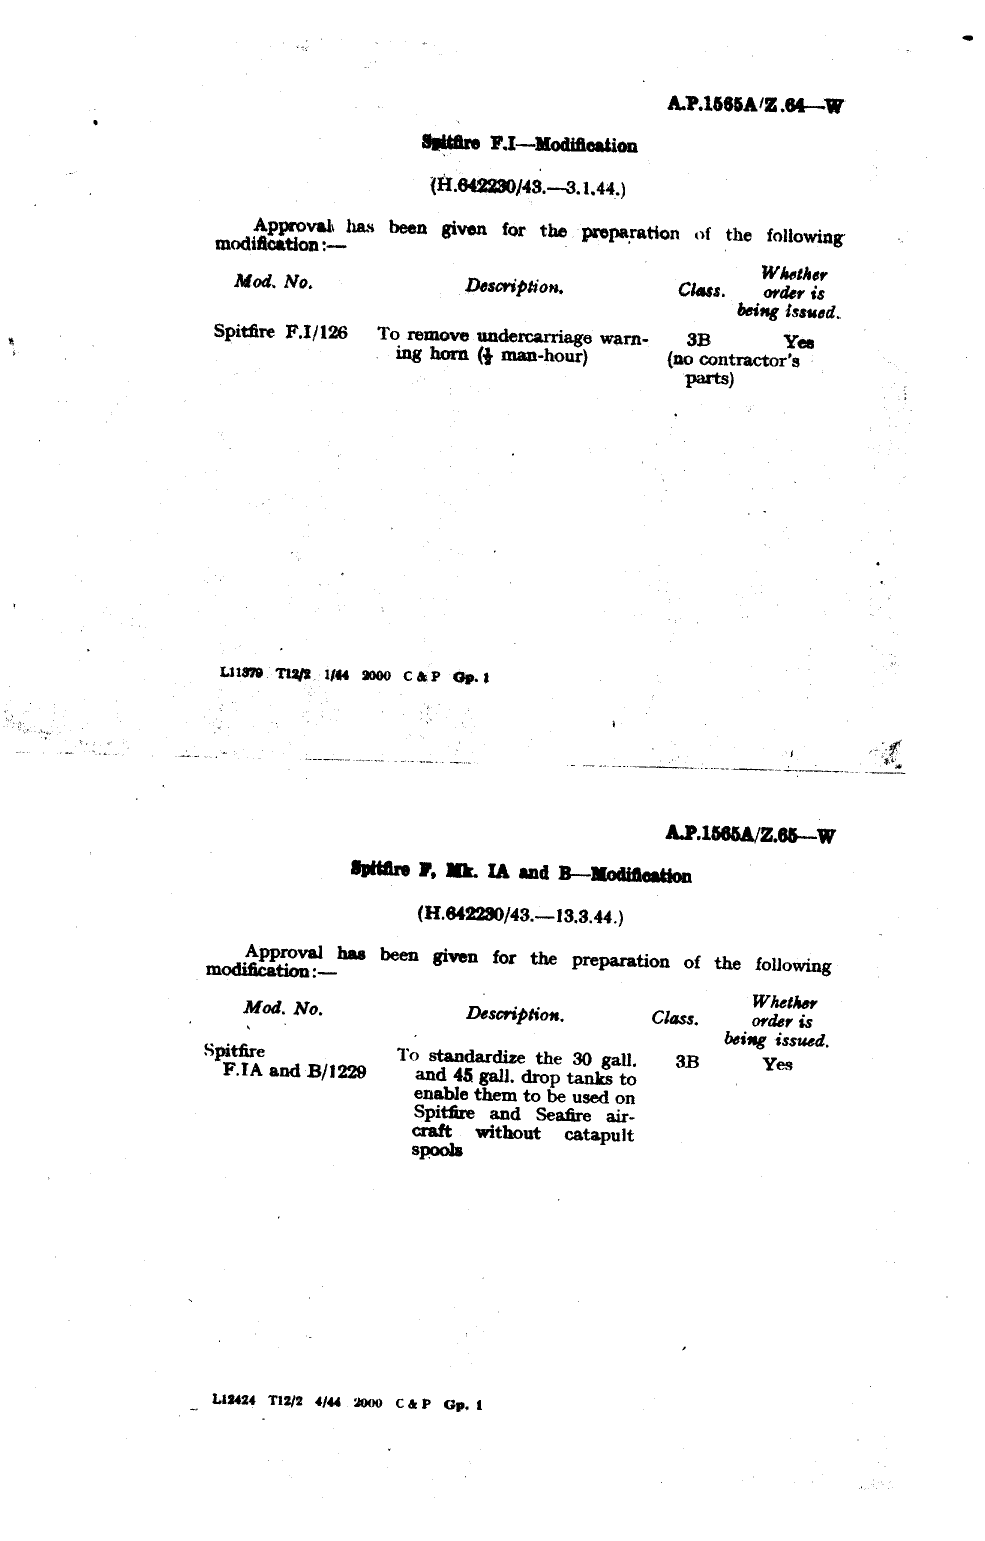 Sample page 1 from AirCorps Library document: Spitfire F.I Modification 126